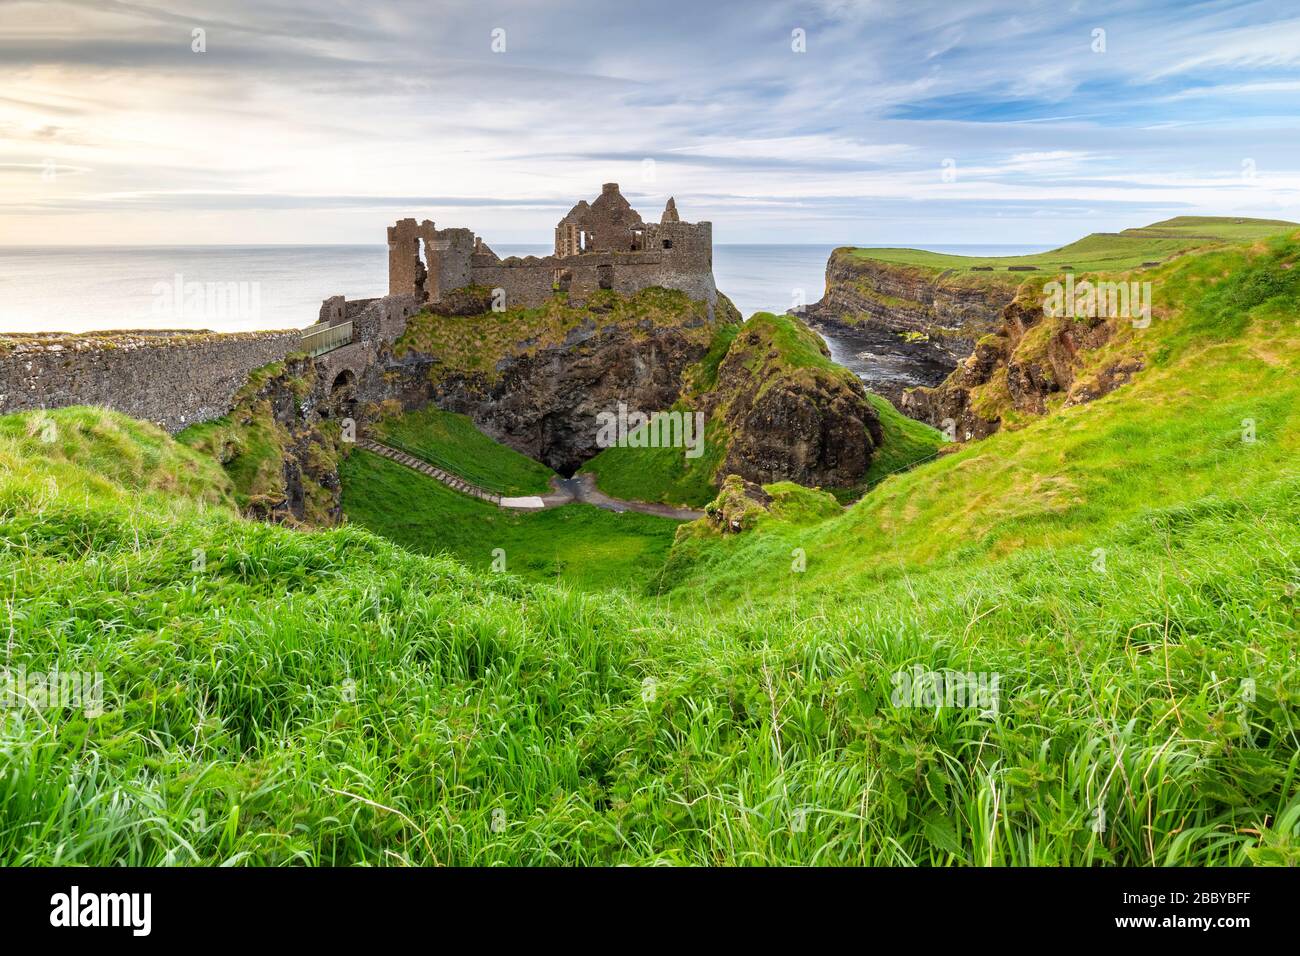 View of the ruins of the Dunluce Castle. Bushmills, County Antrim, Ulster region, Northern Ireland, United Kingdom. Stock Photo